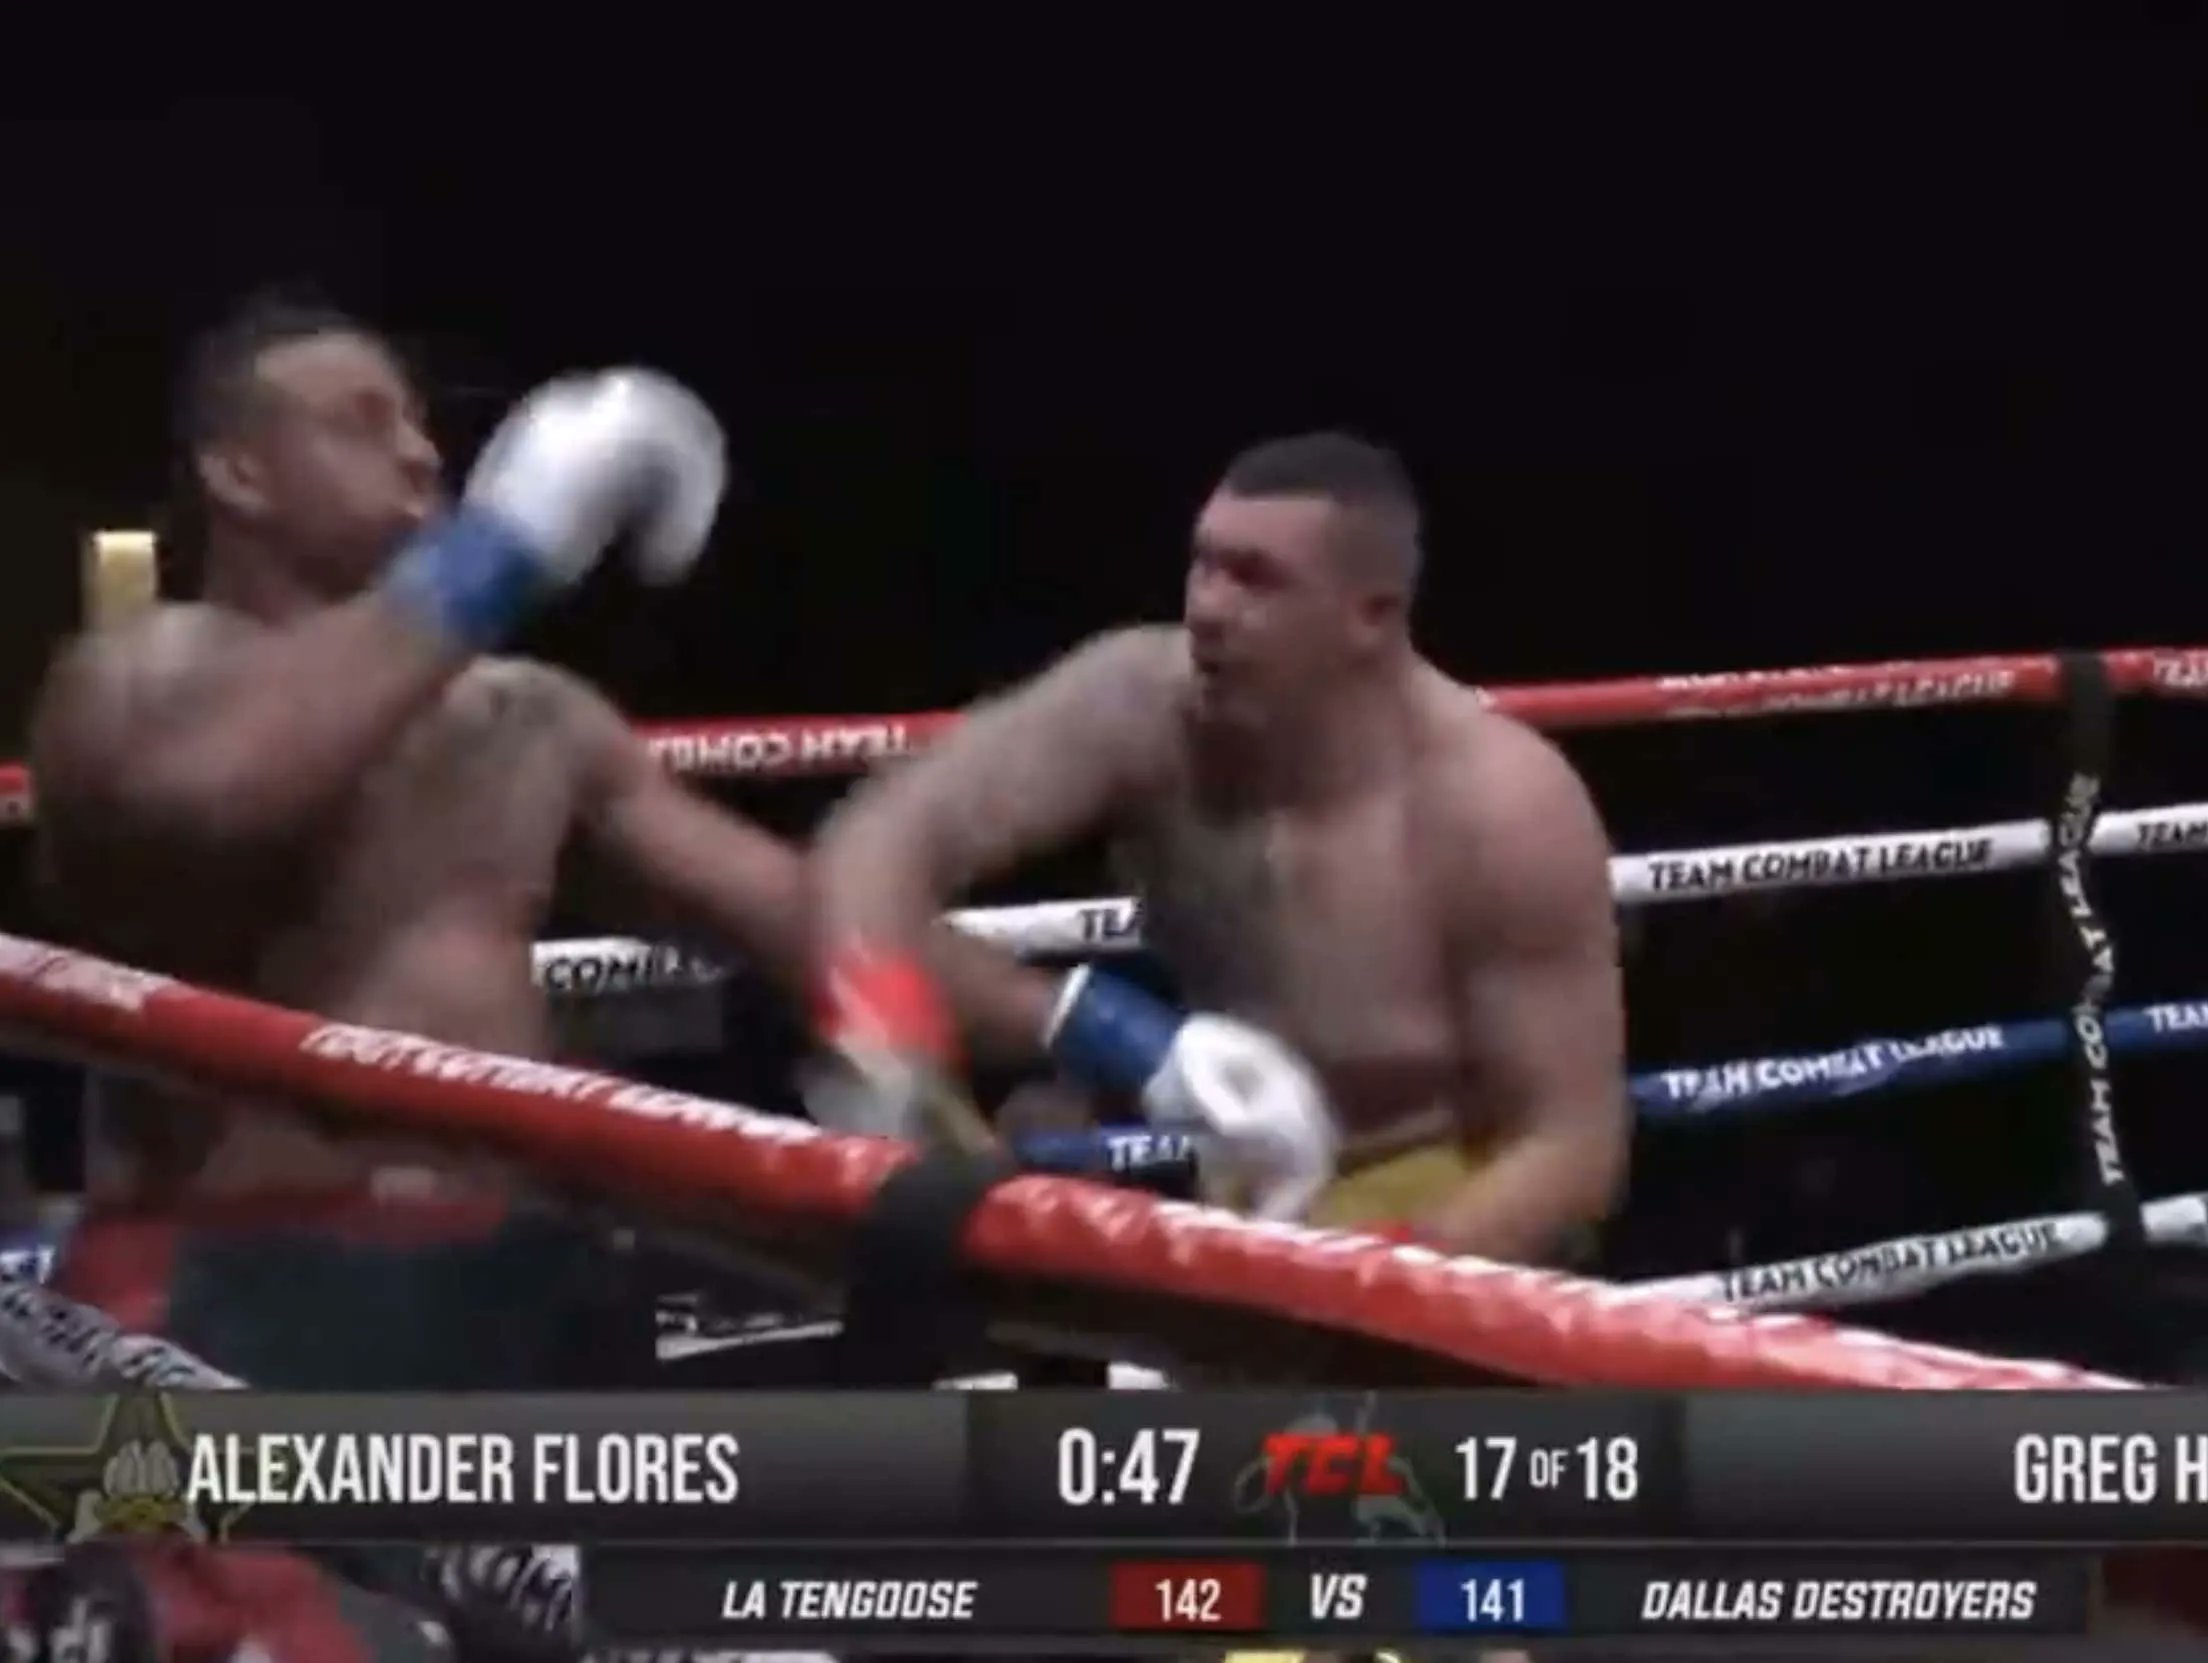 VIDEO: Greg Hardy knocked out in 17th round of boxing bout